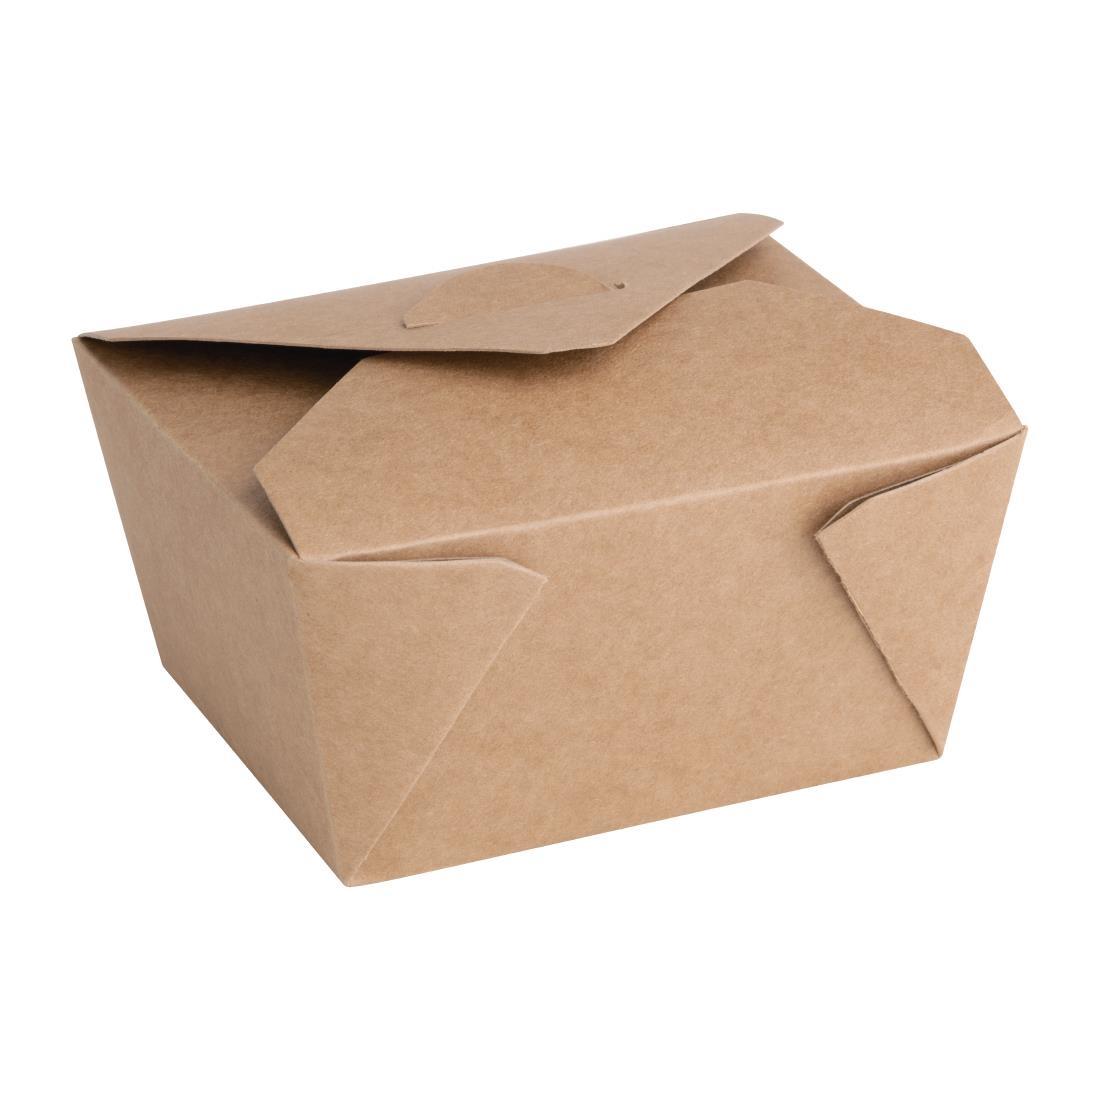 Fiesta Recyclable Cardboard Takeaway Food Containers 112mm (Pack of 300) - FN894  - 1